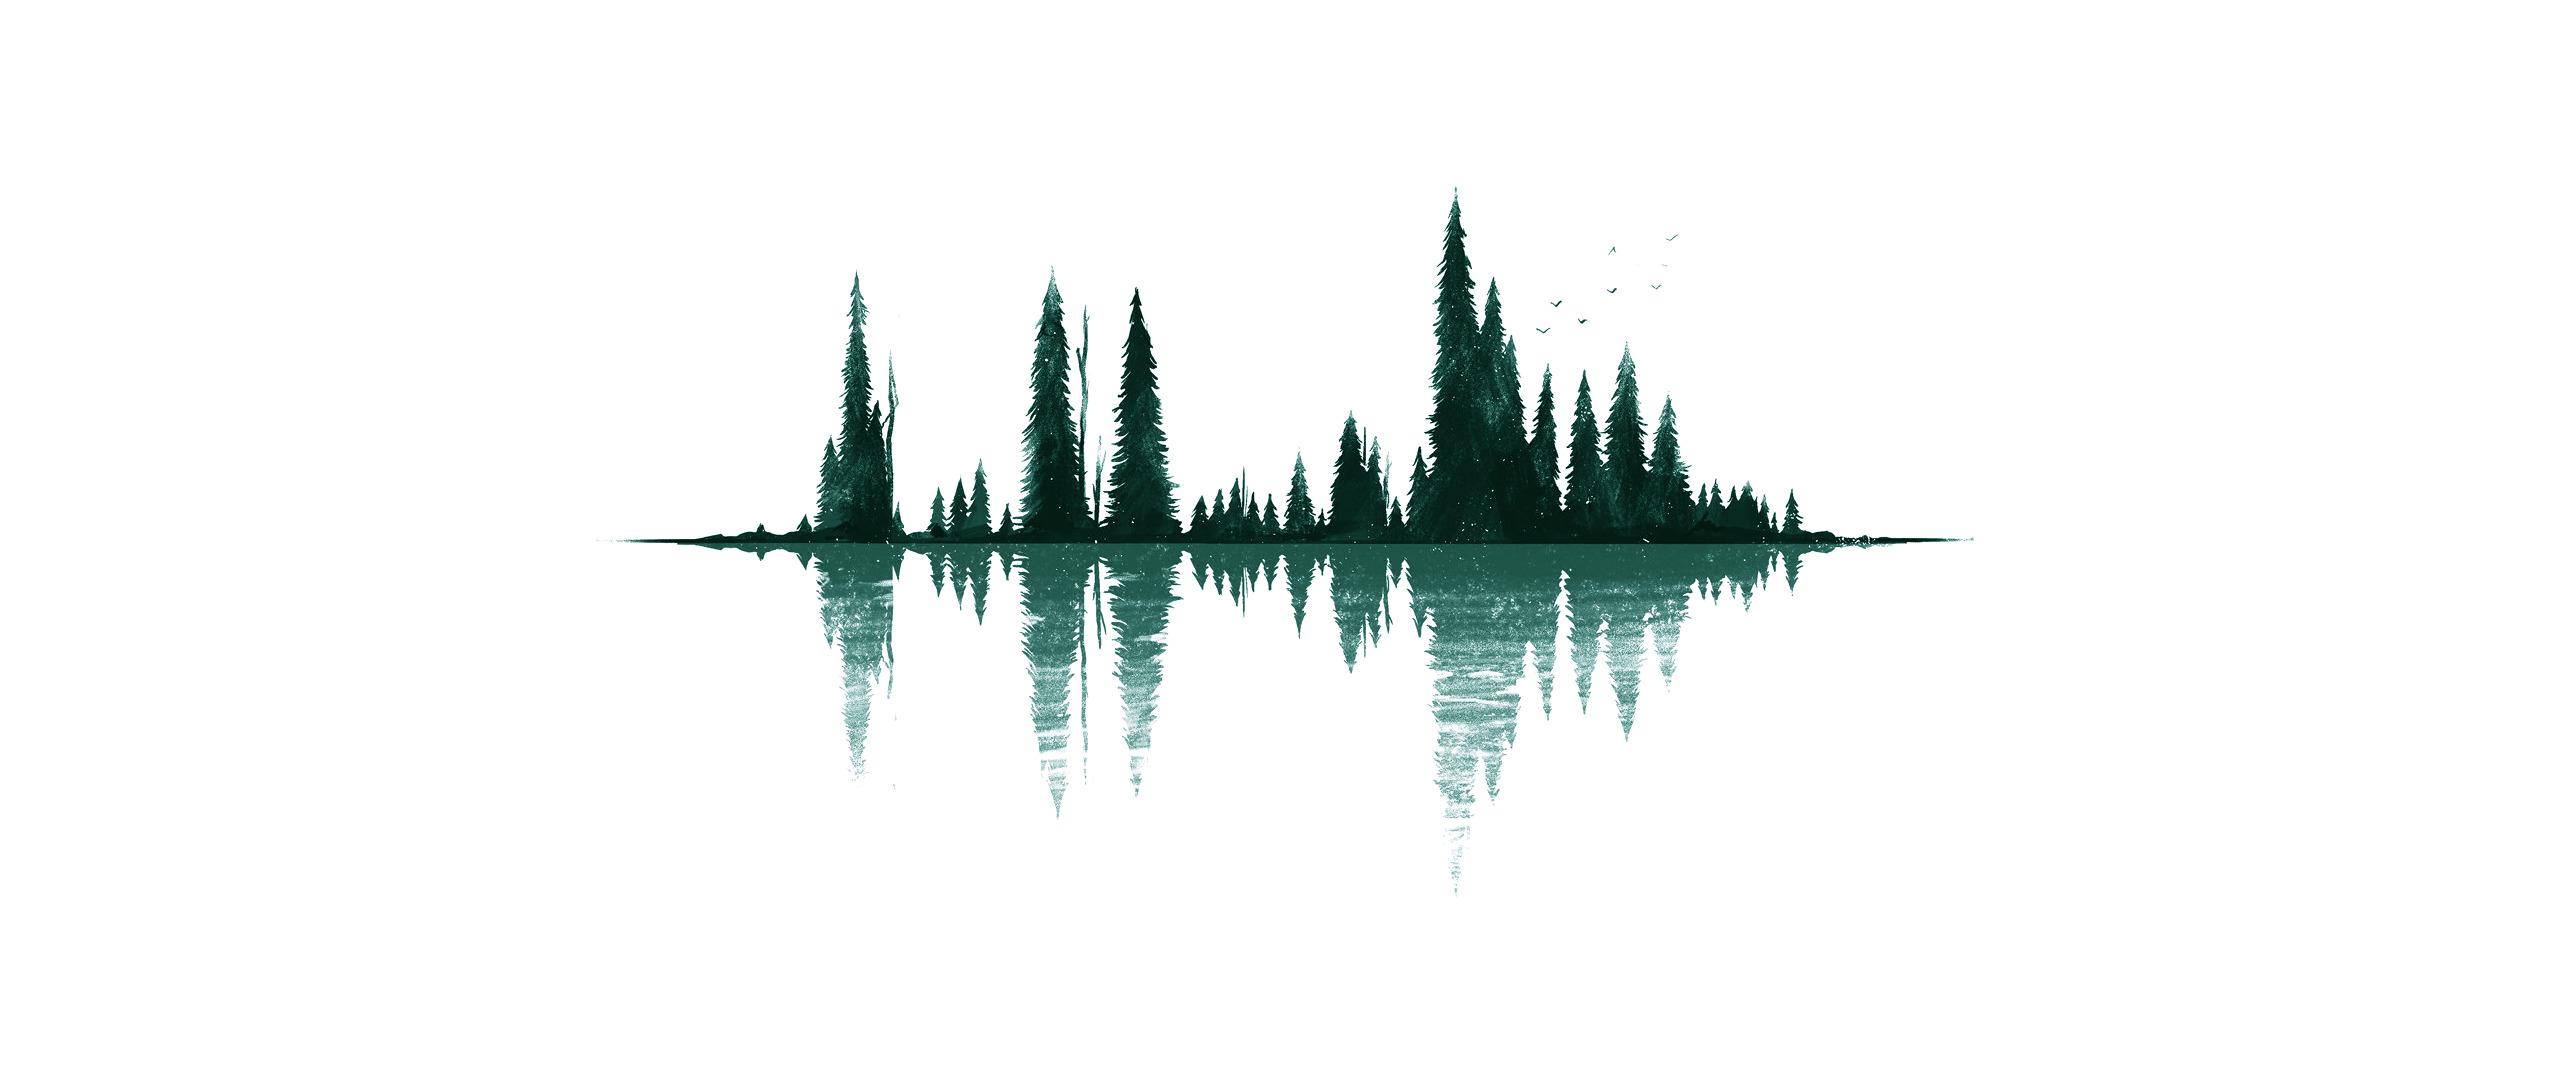 ultra wide, Minimalism, Artwork, Reflection, Trees, Simple